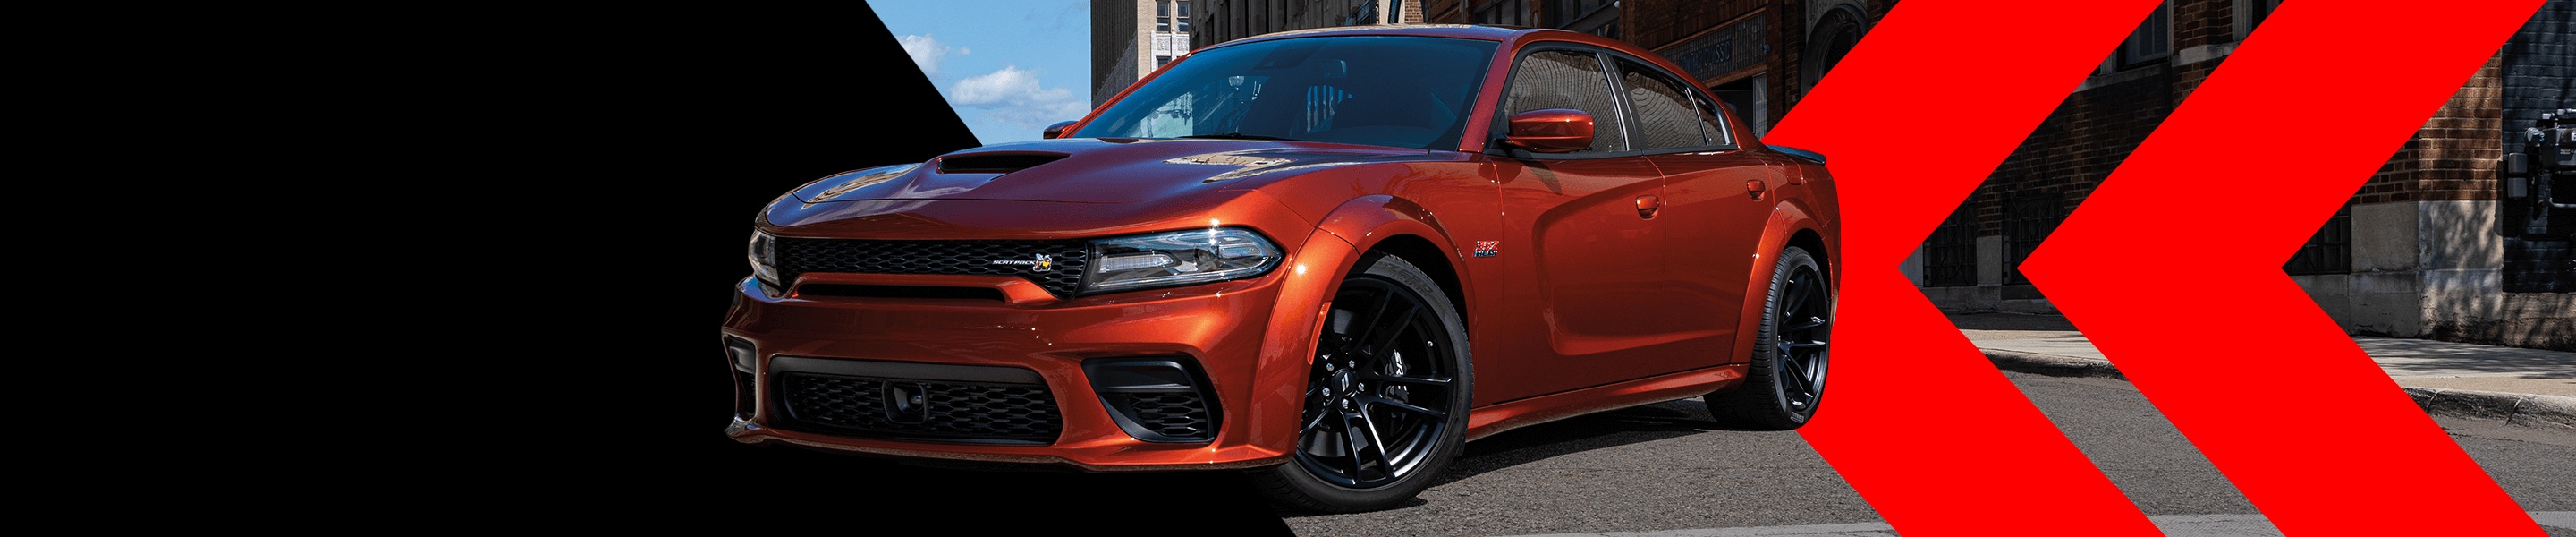 Dodge Charger interior and exterior color options